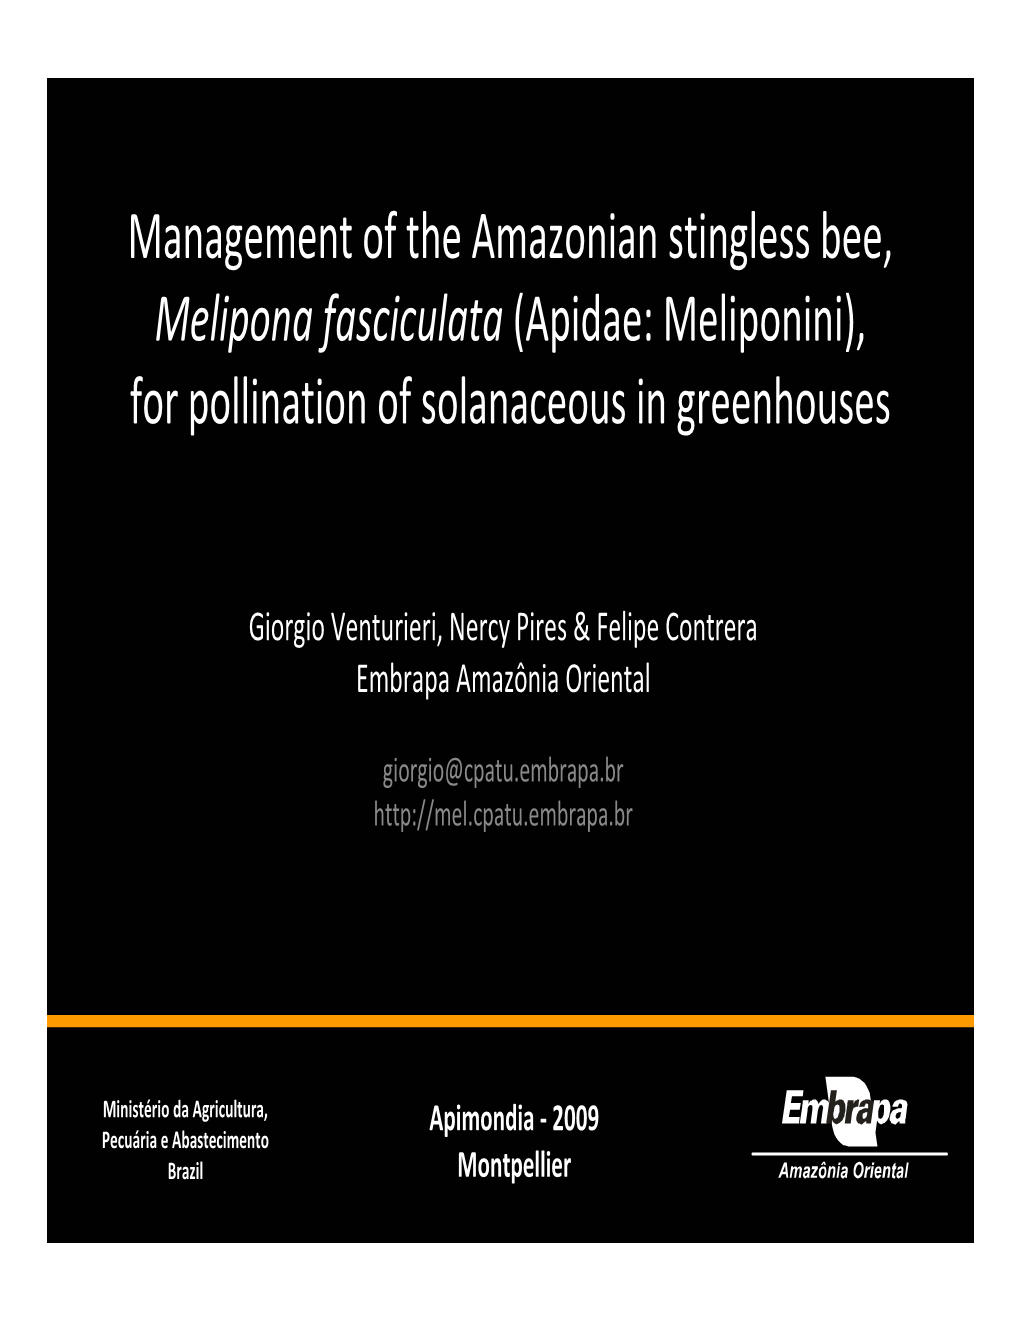 Management of the Amazonian Stingless Bee, Melipona Fasciculata (Apidae: Meliponini), for Pollination of Solanaceous in Greenhouses